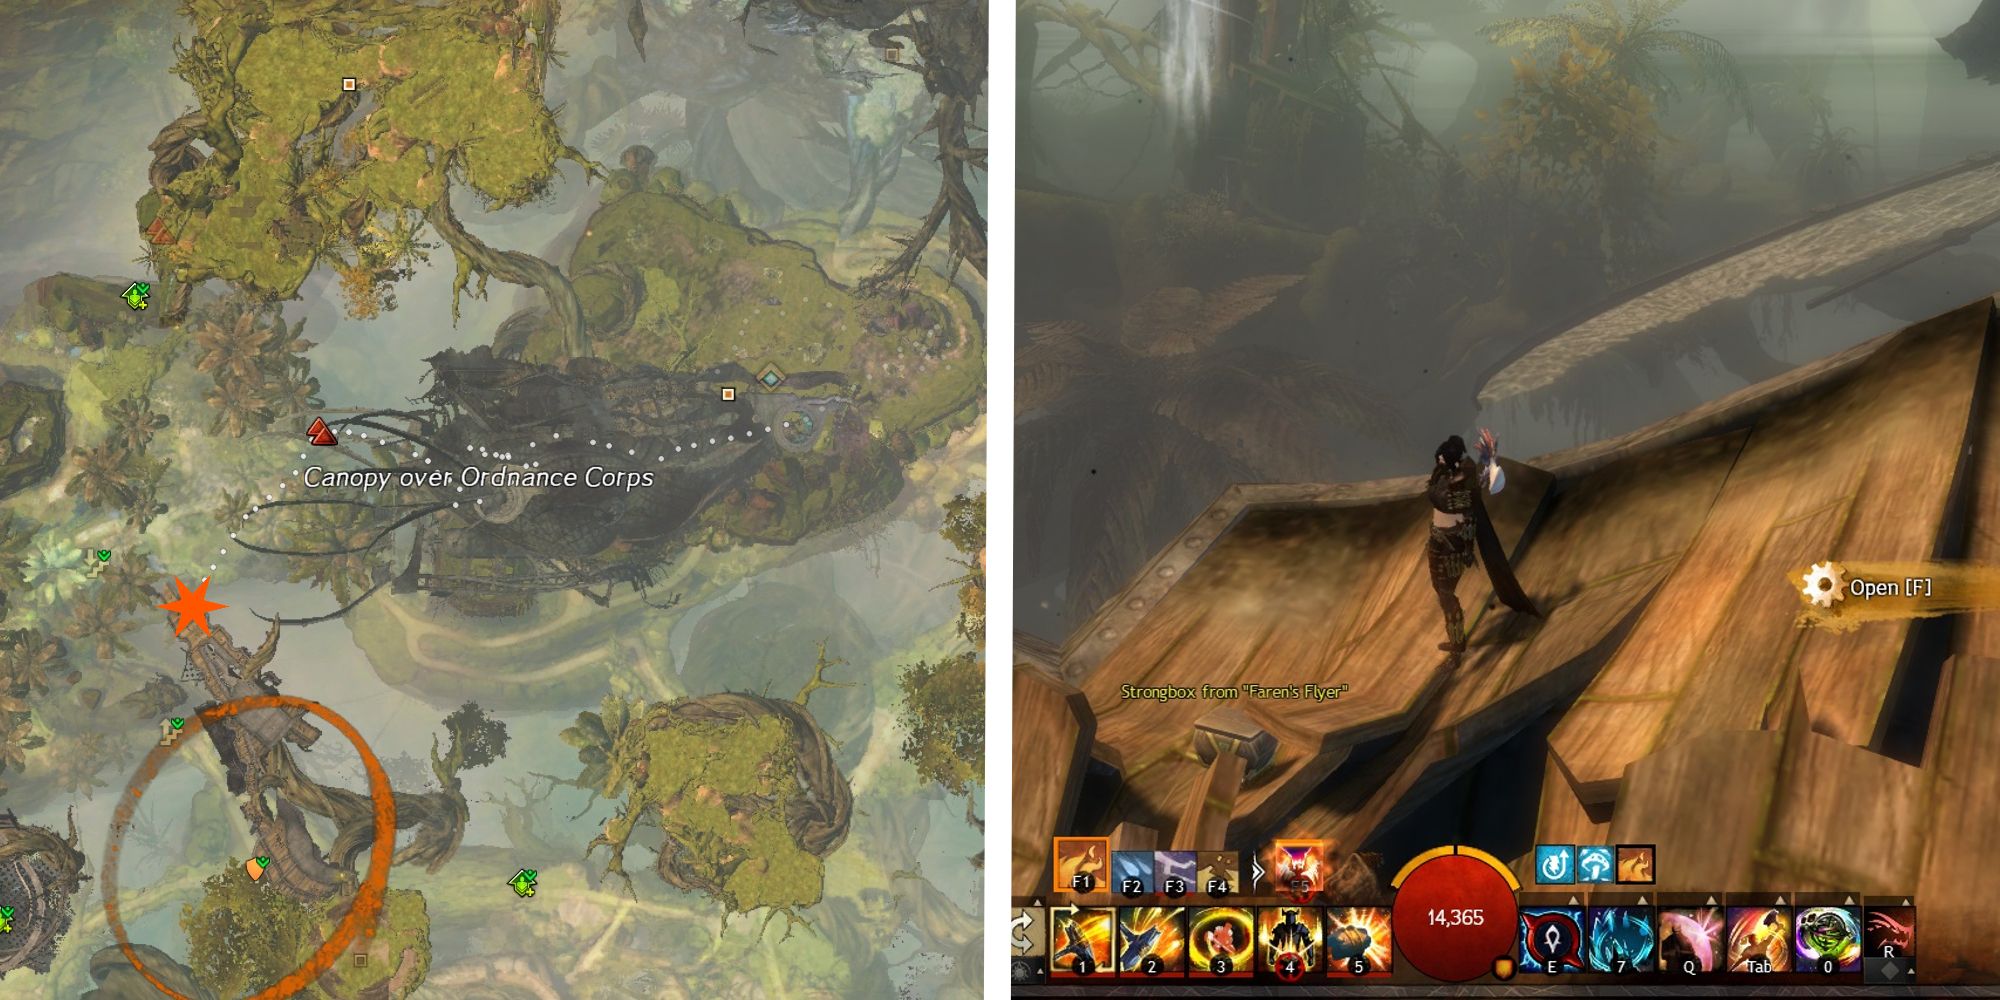 Faren's Flyer strongbox location on map, next to image of player standing at box